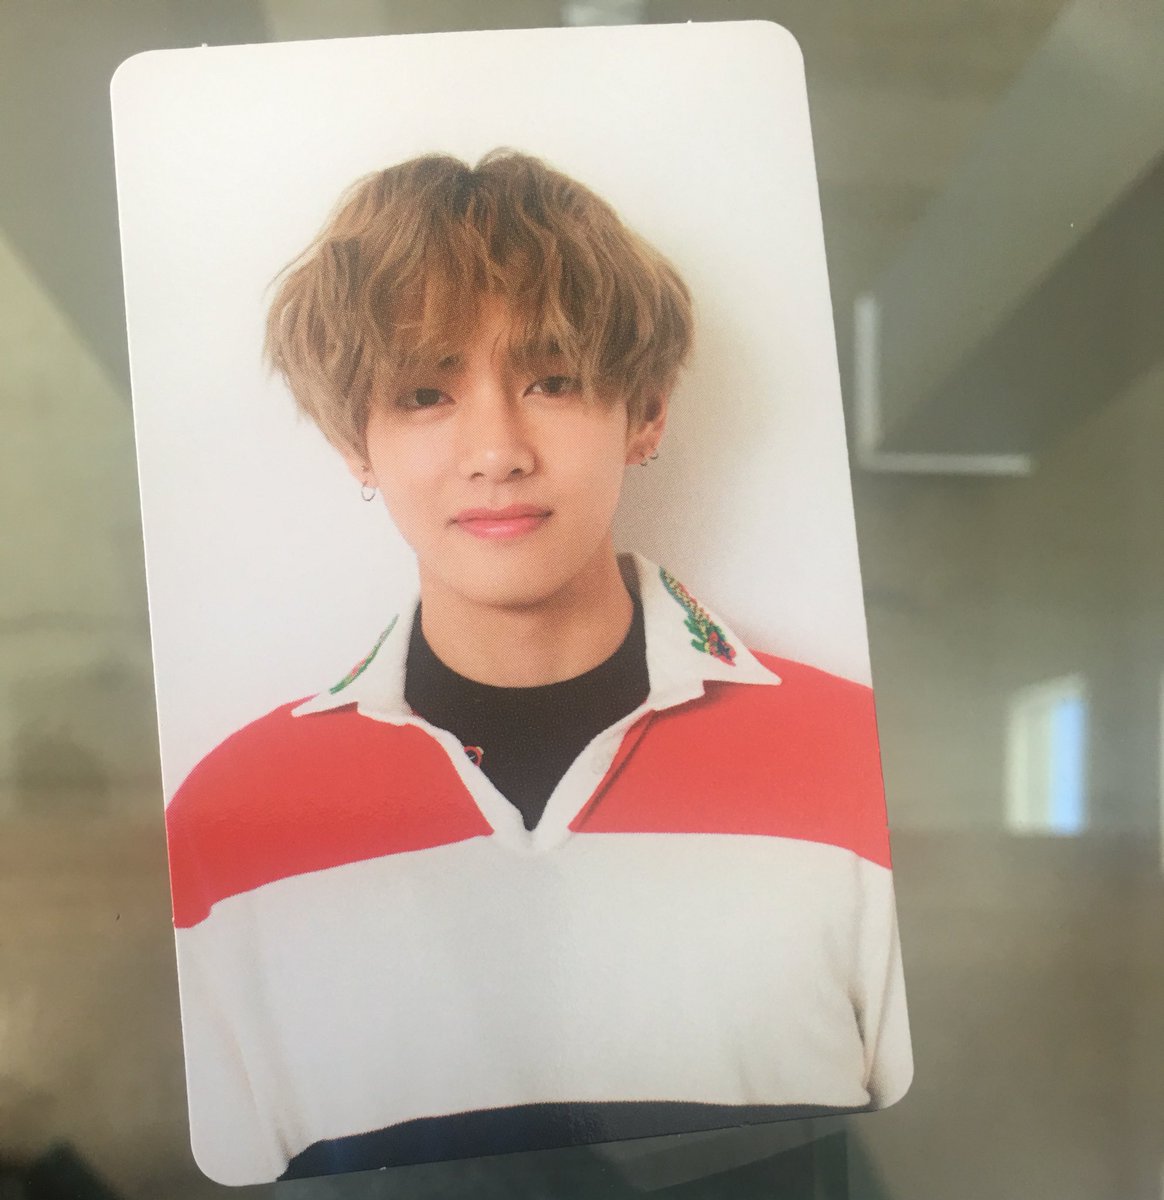 Paranafloden morgue Skrivemaskine RKive ⁷ on Twitter: "✨BTS Photocard Trade✨ Have: LYS: HER O Version  Jungkook V Version Taehyung/V E Version Jin Would like to trade for Namjoon  versions only No cross trading USA/CAN only